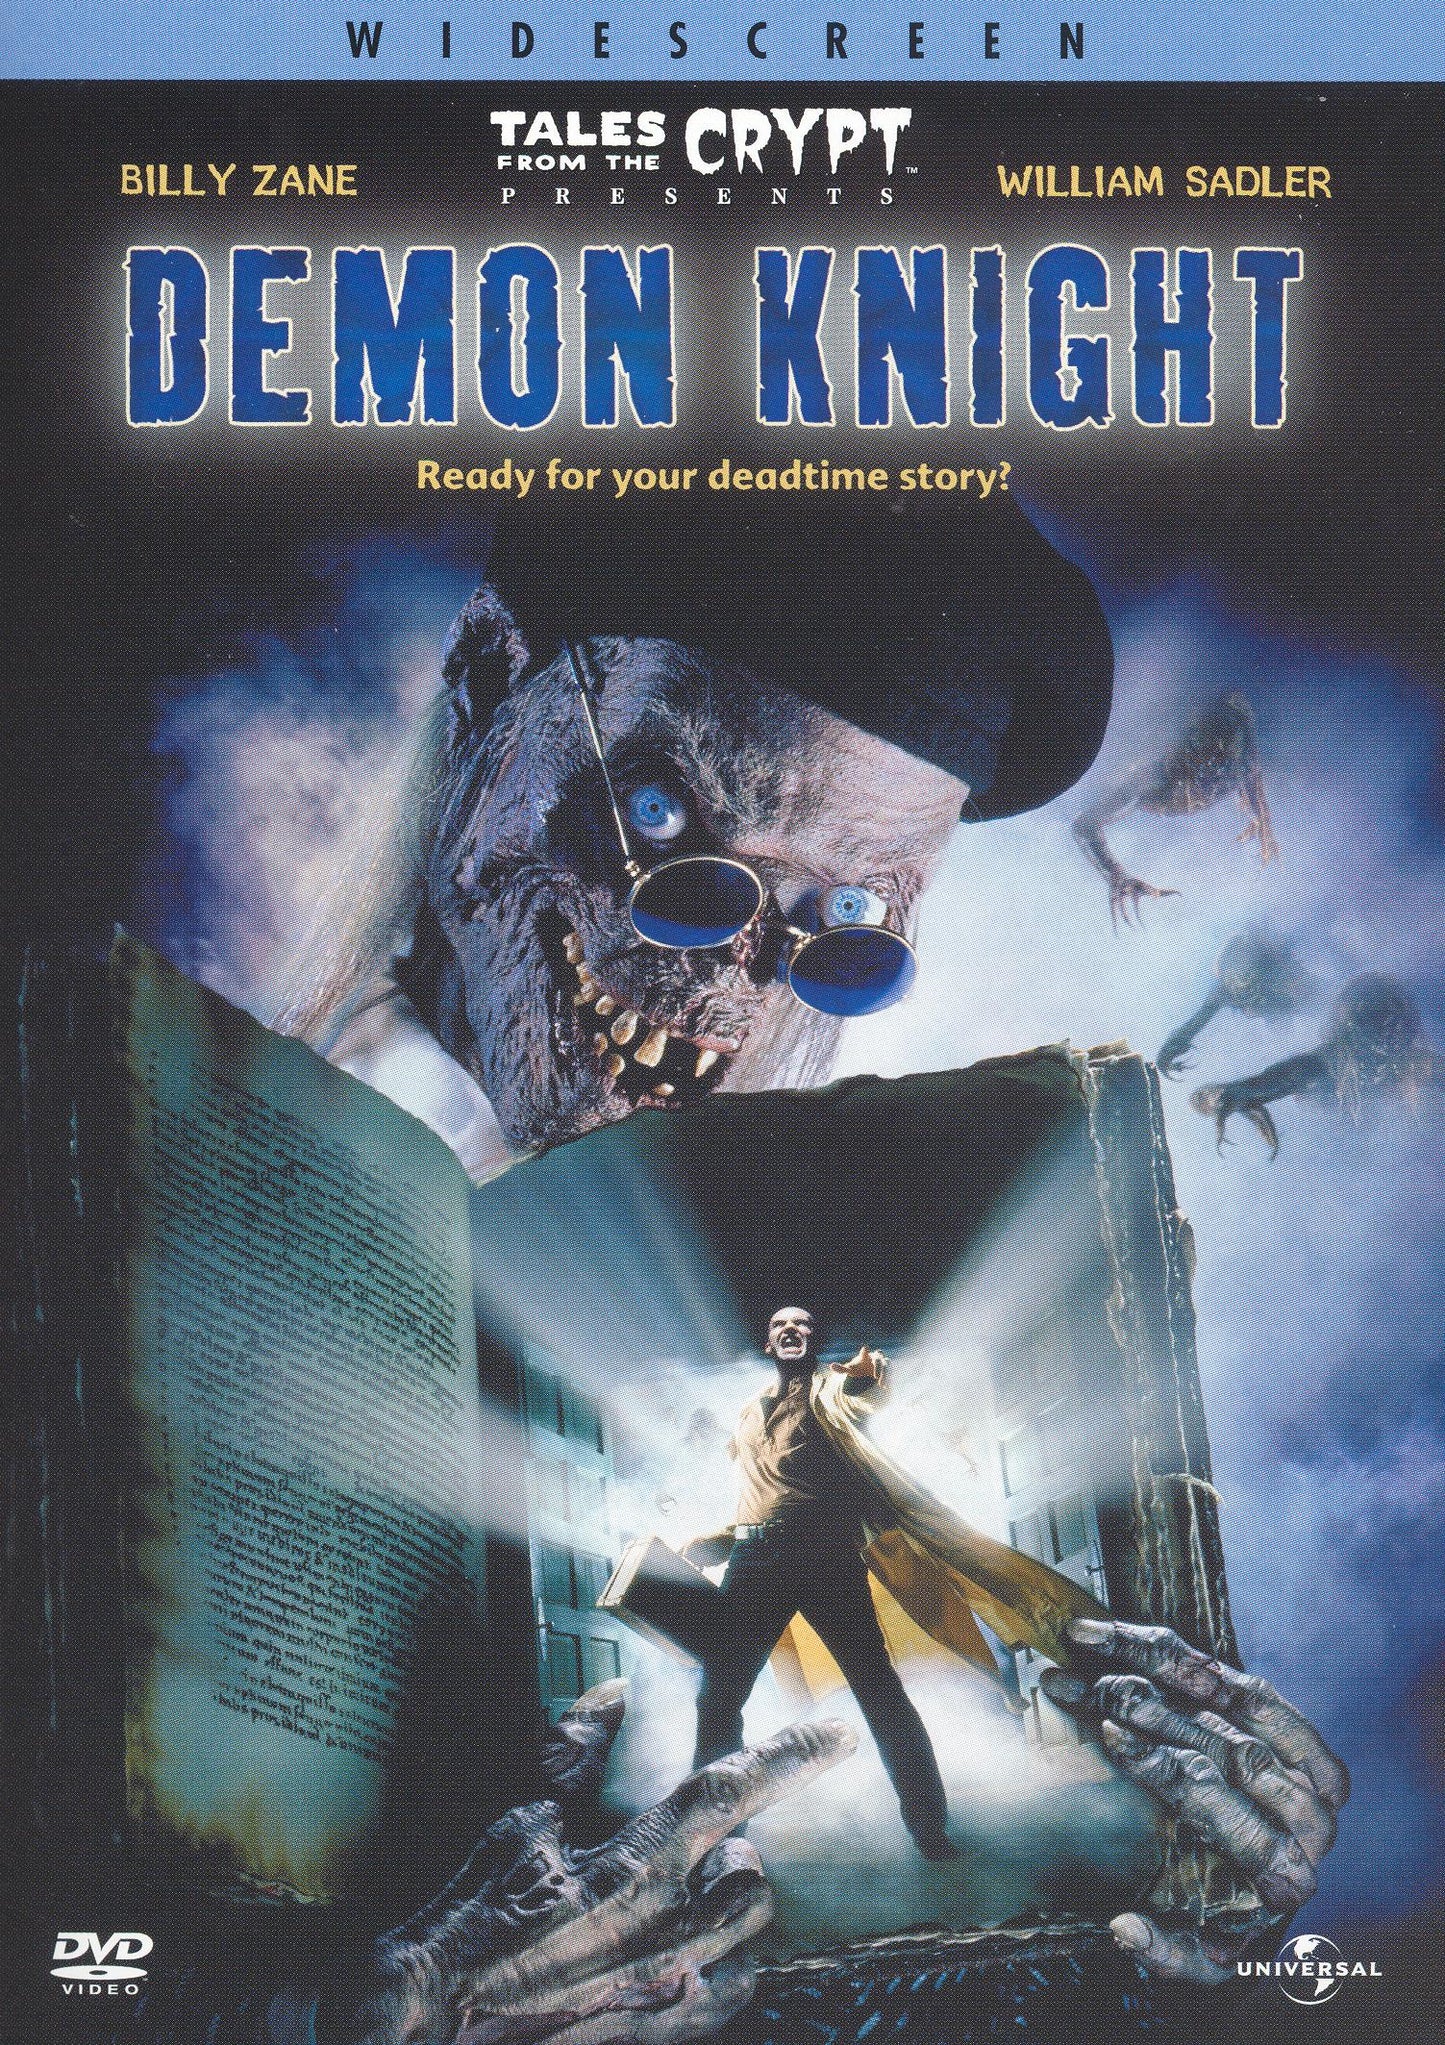 Tales from the Crypt Presents Demon Knight cover art